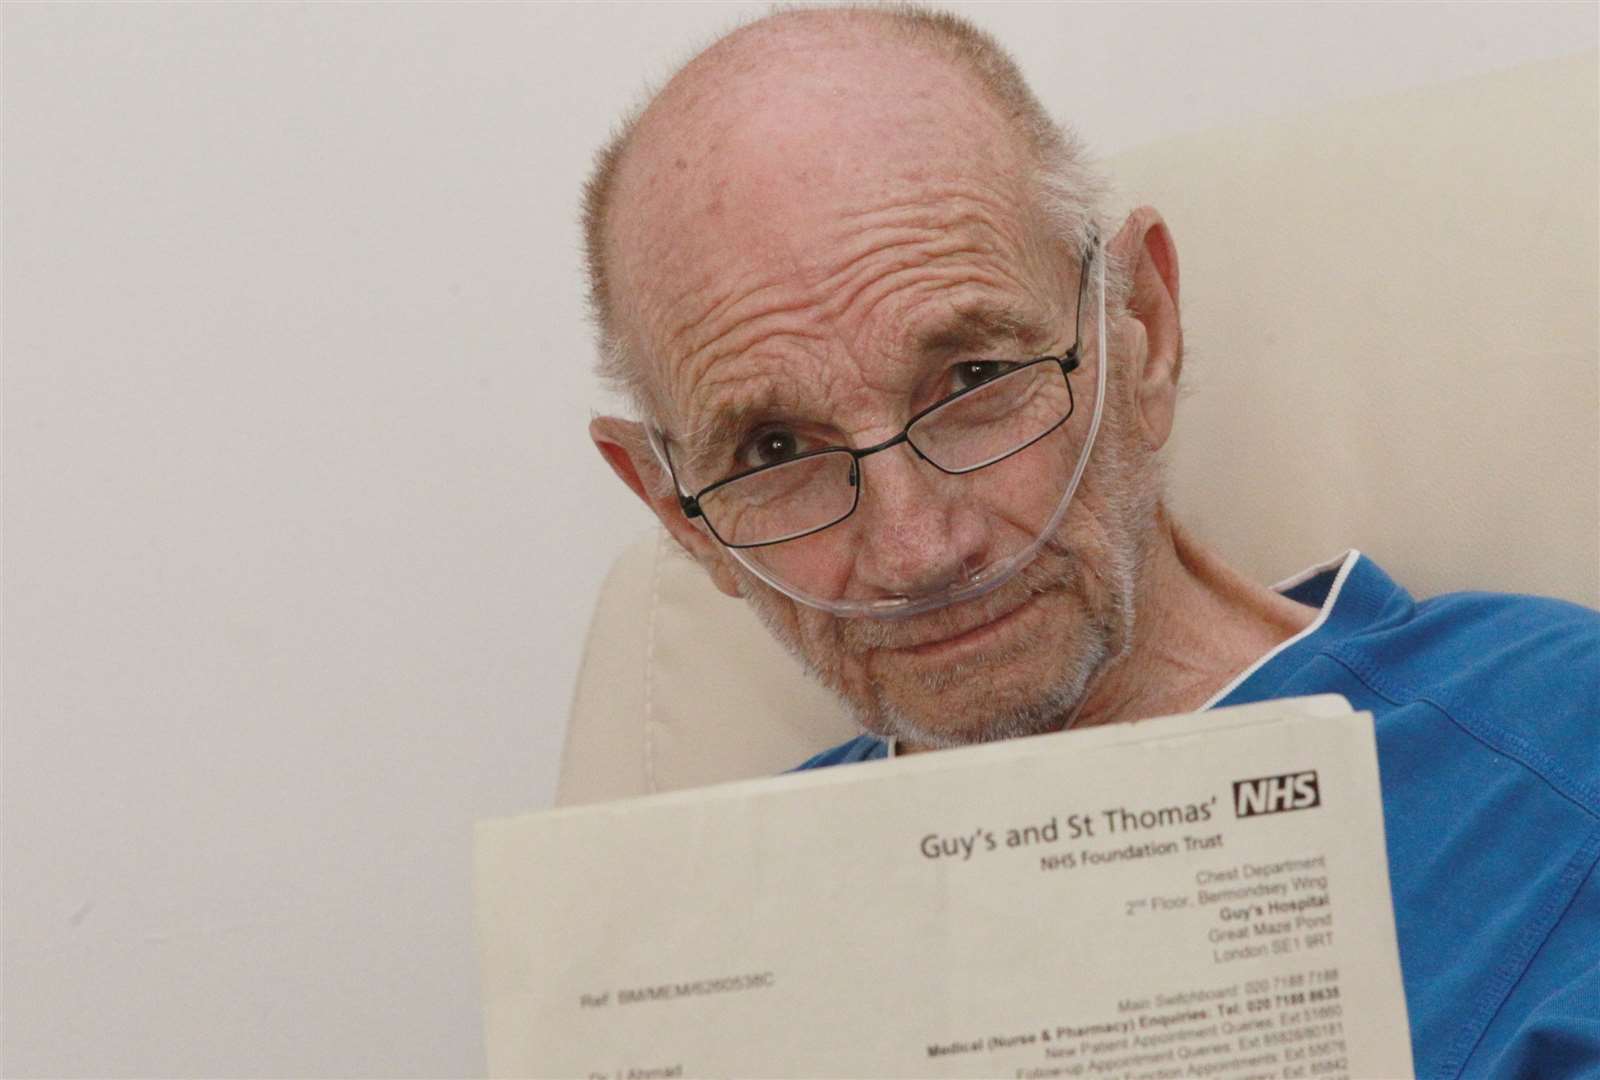 David Skinner with a letter from Guys Hospital recommending drugs he needs for his illness that he cannot get very easily in Medway. Picture: John Westhrop. (14188239)